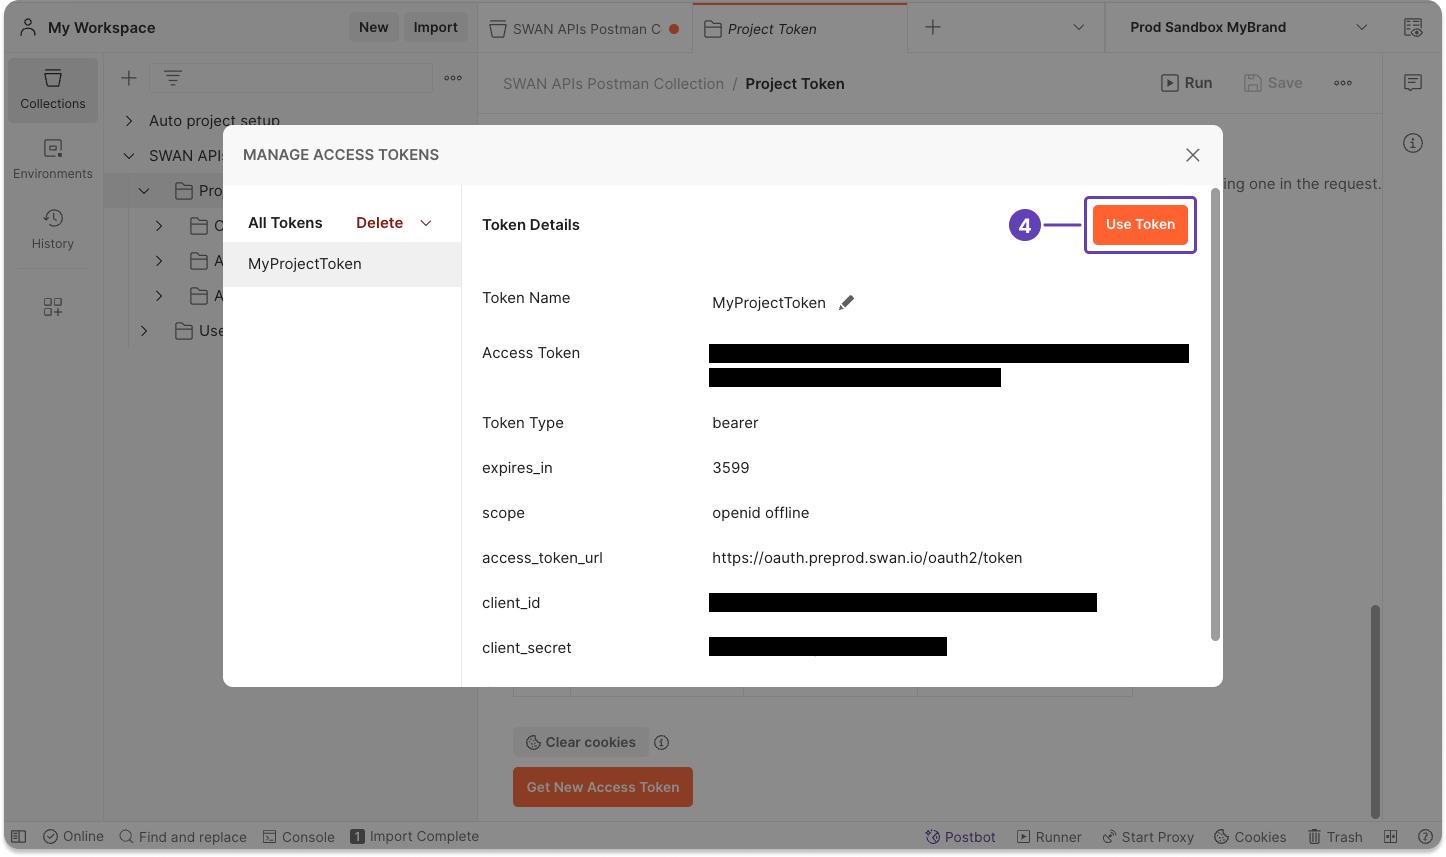 Image of Postman guiding user to use the new project access token